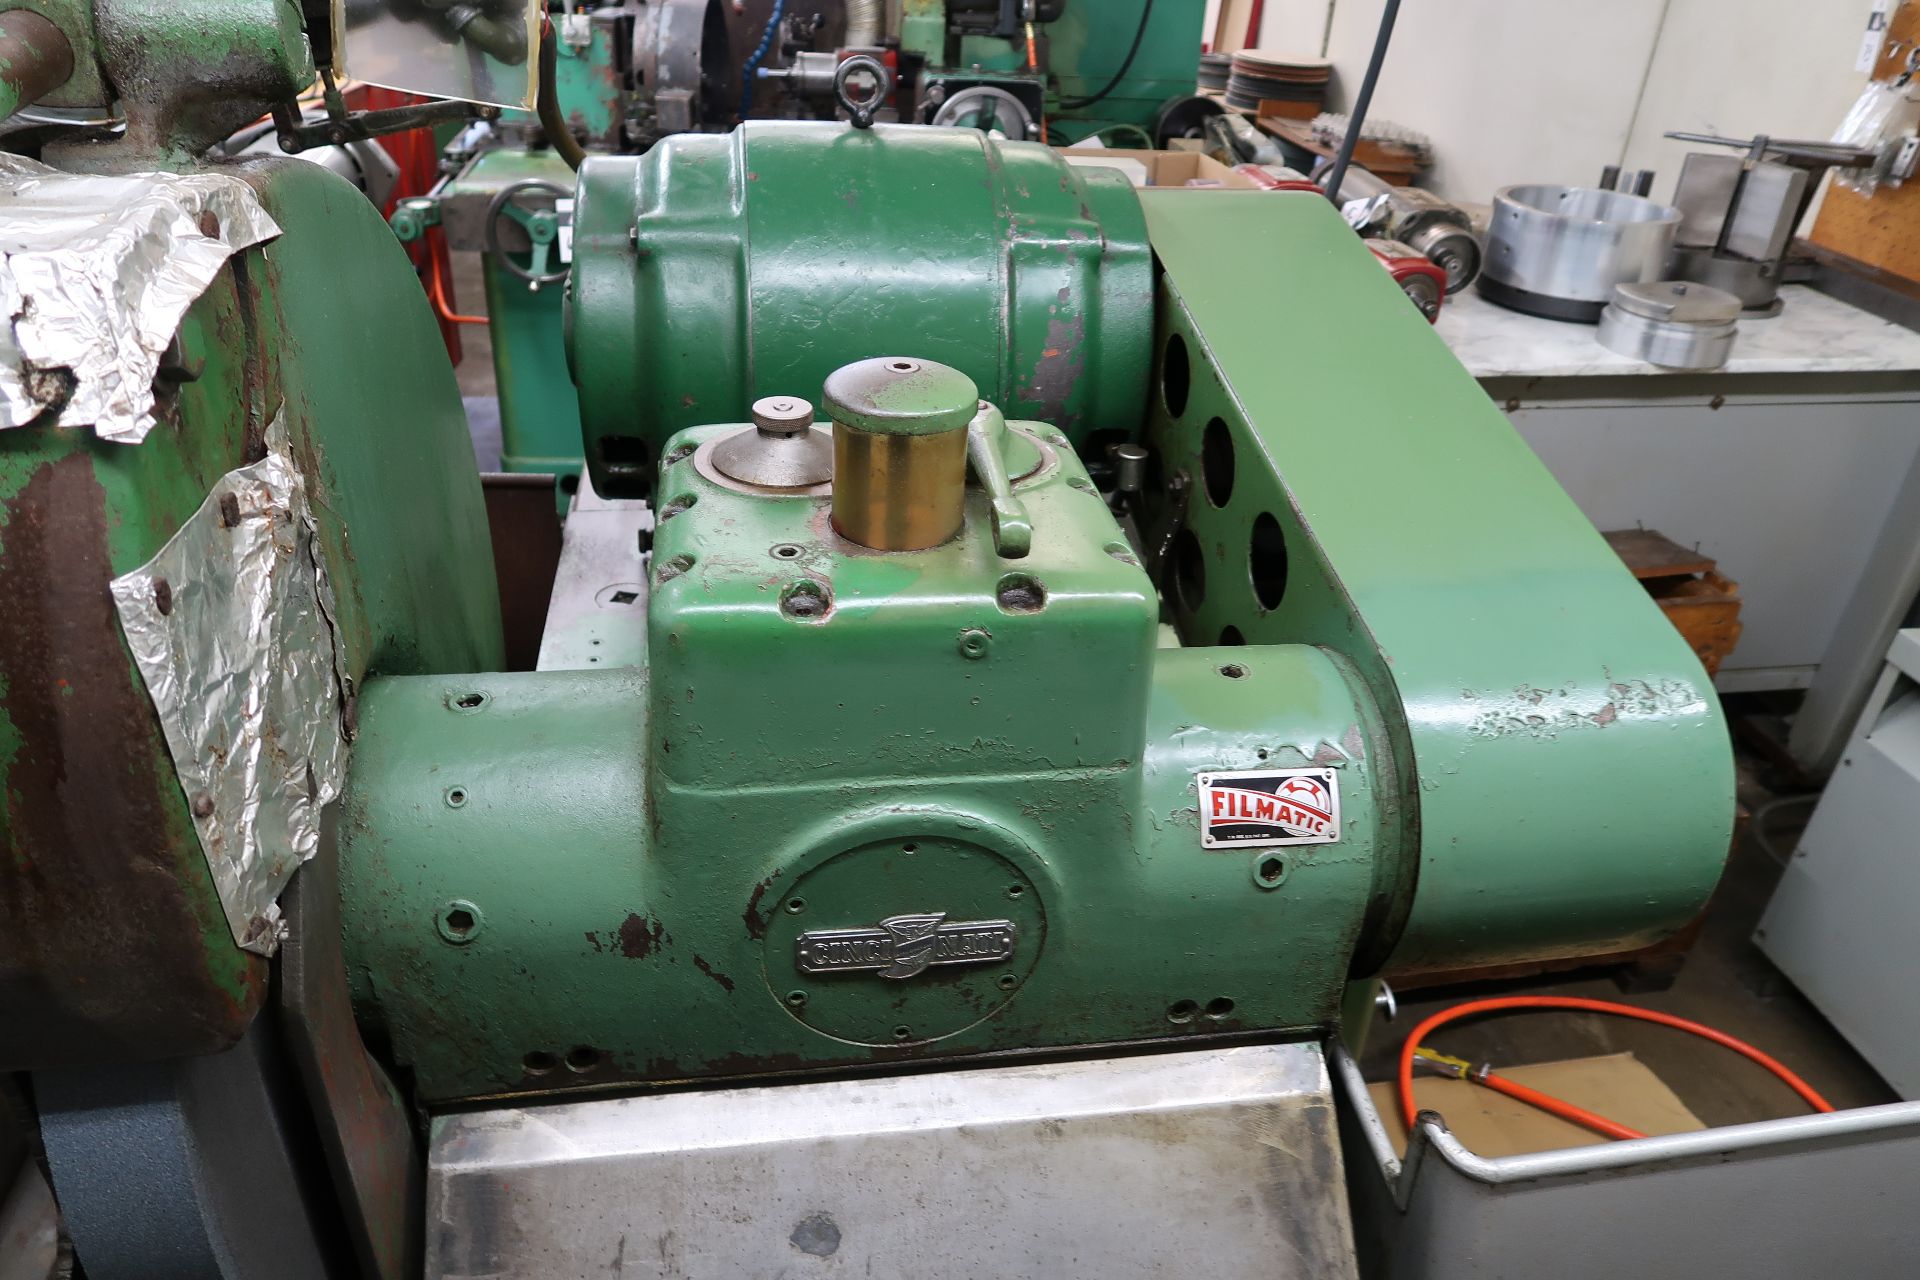 Cincinnati 10” x 48” Automatic Cylindrical Grinder s/n 3P25A-4 w/ Motorized Work Head, SOLD AS IS - Image 10 of 16